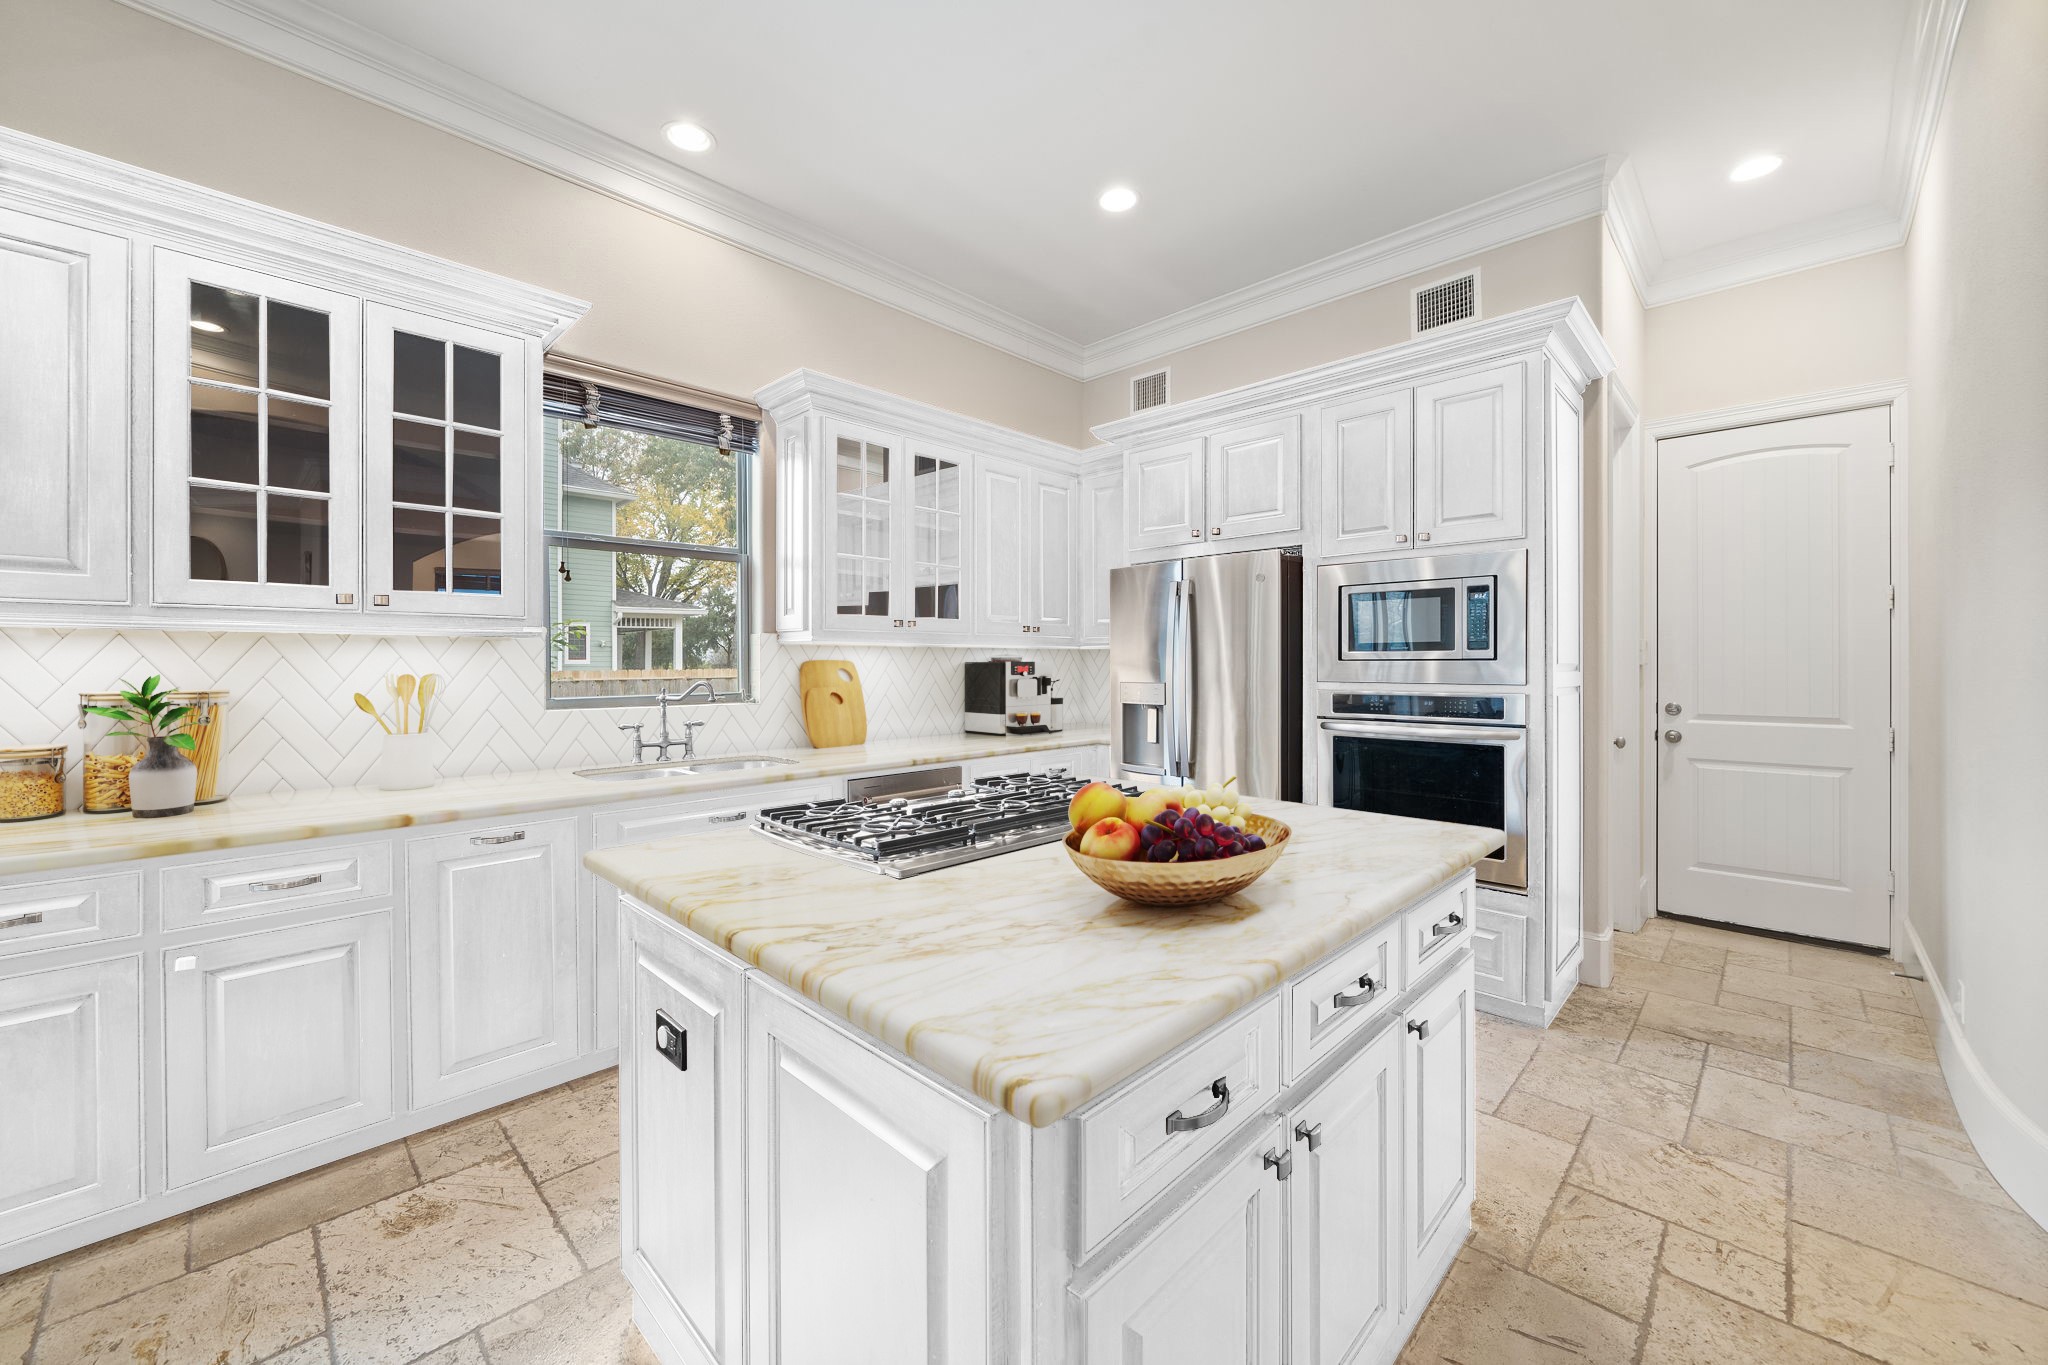 This is a virtual image to show the kitchen if you wanted to paint the cabinets white and replace the countertops and backsplash.